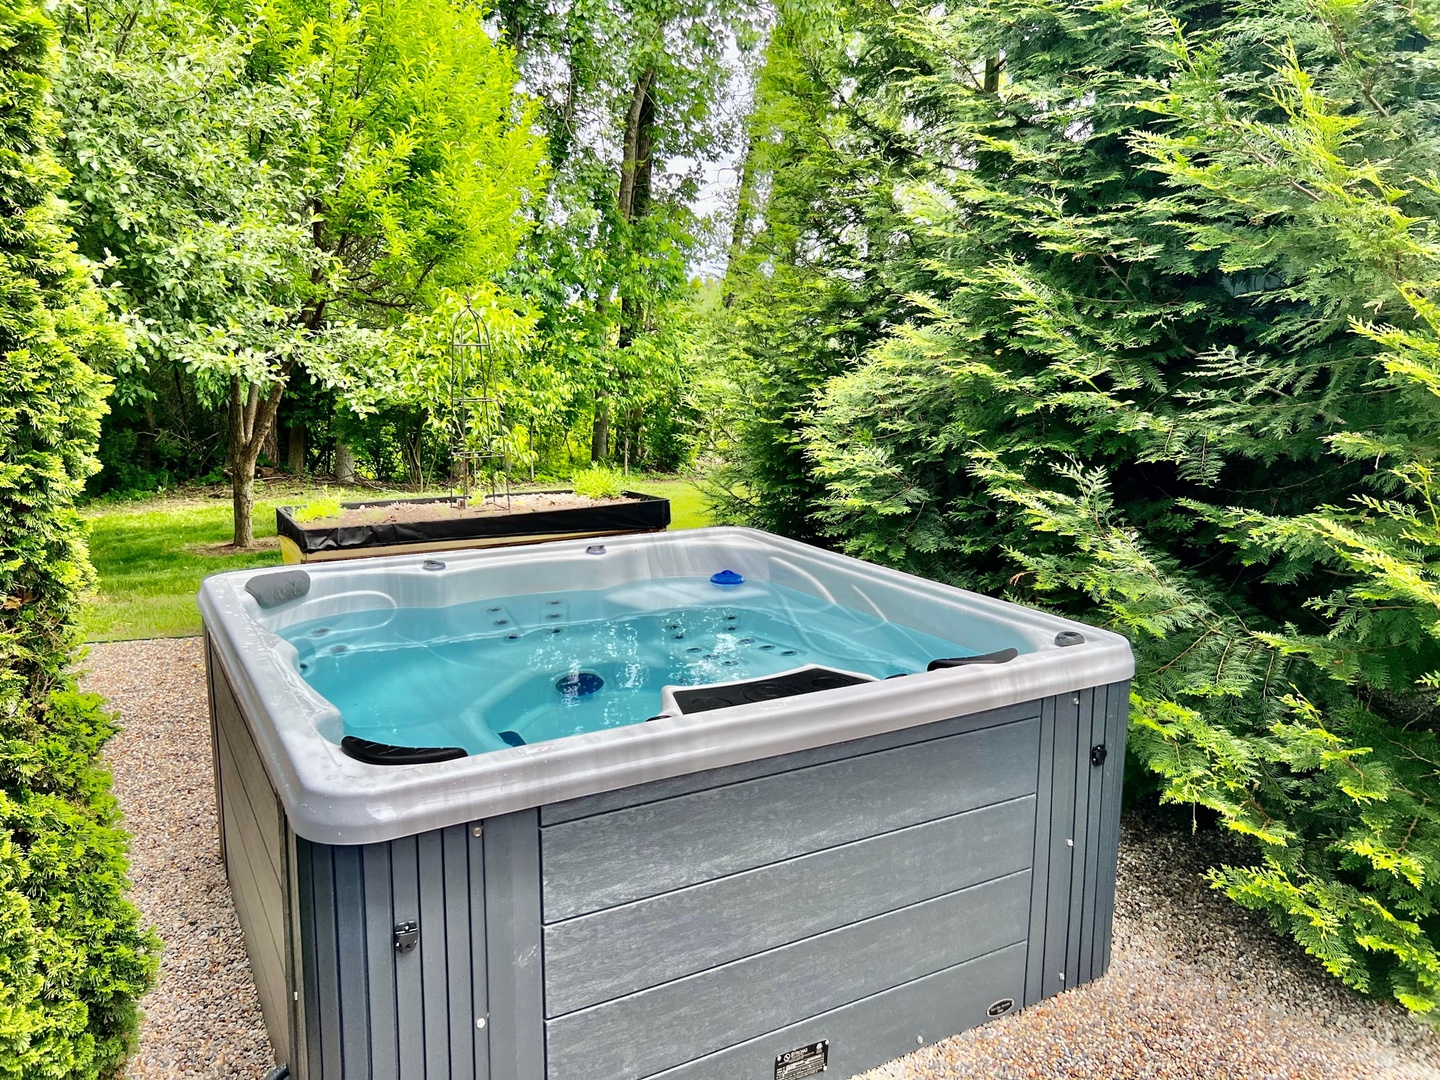 Our hot tub is perfect for relaxing after a fun filled day!